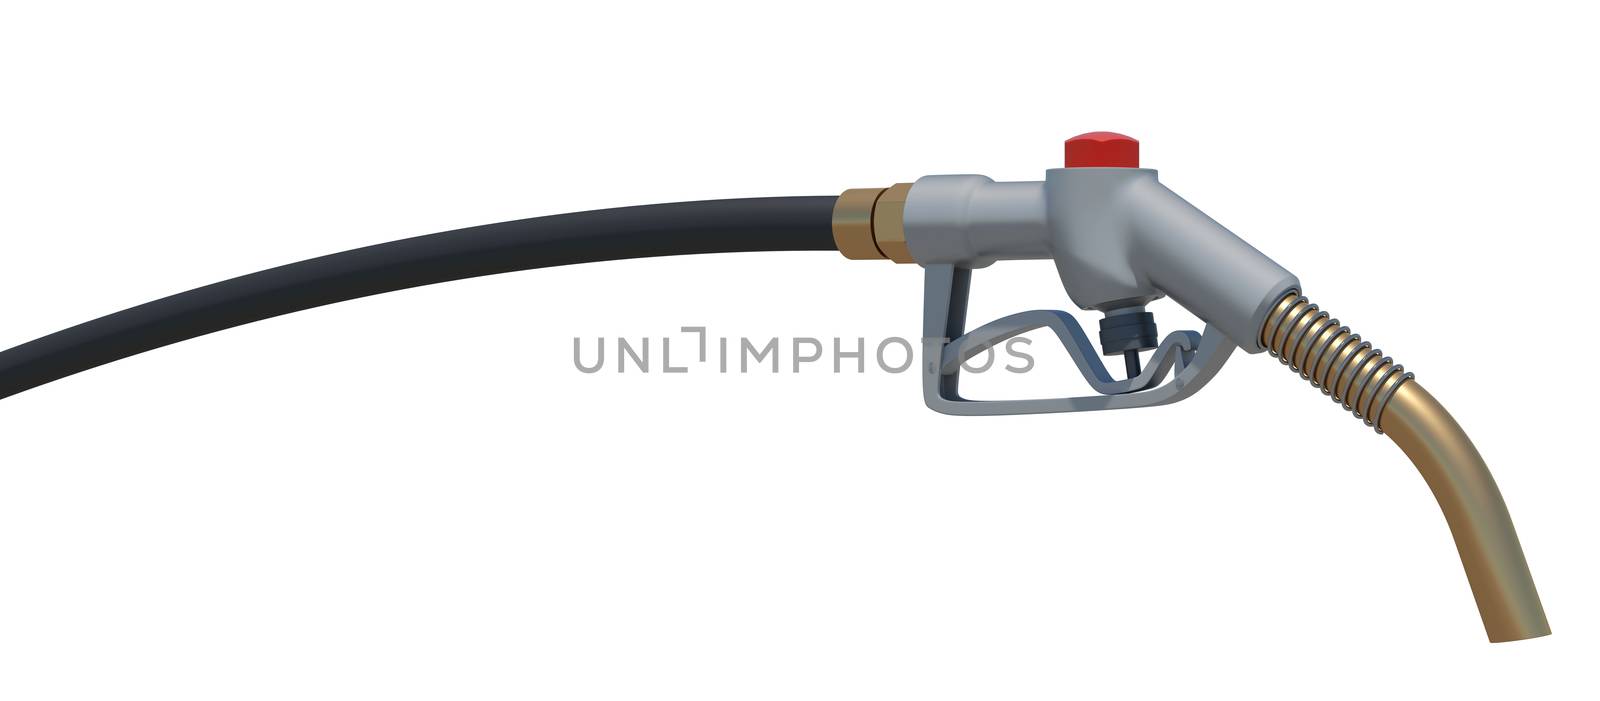 Gasoline dispenser. Front view. Isolated render on white background